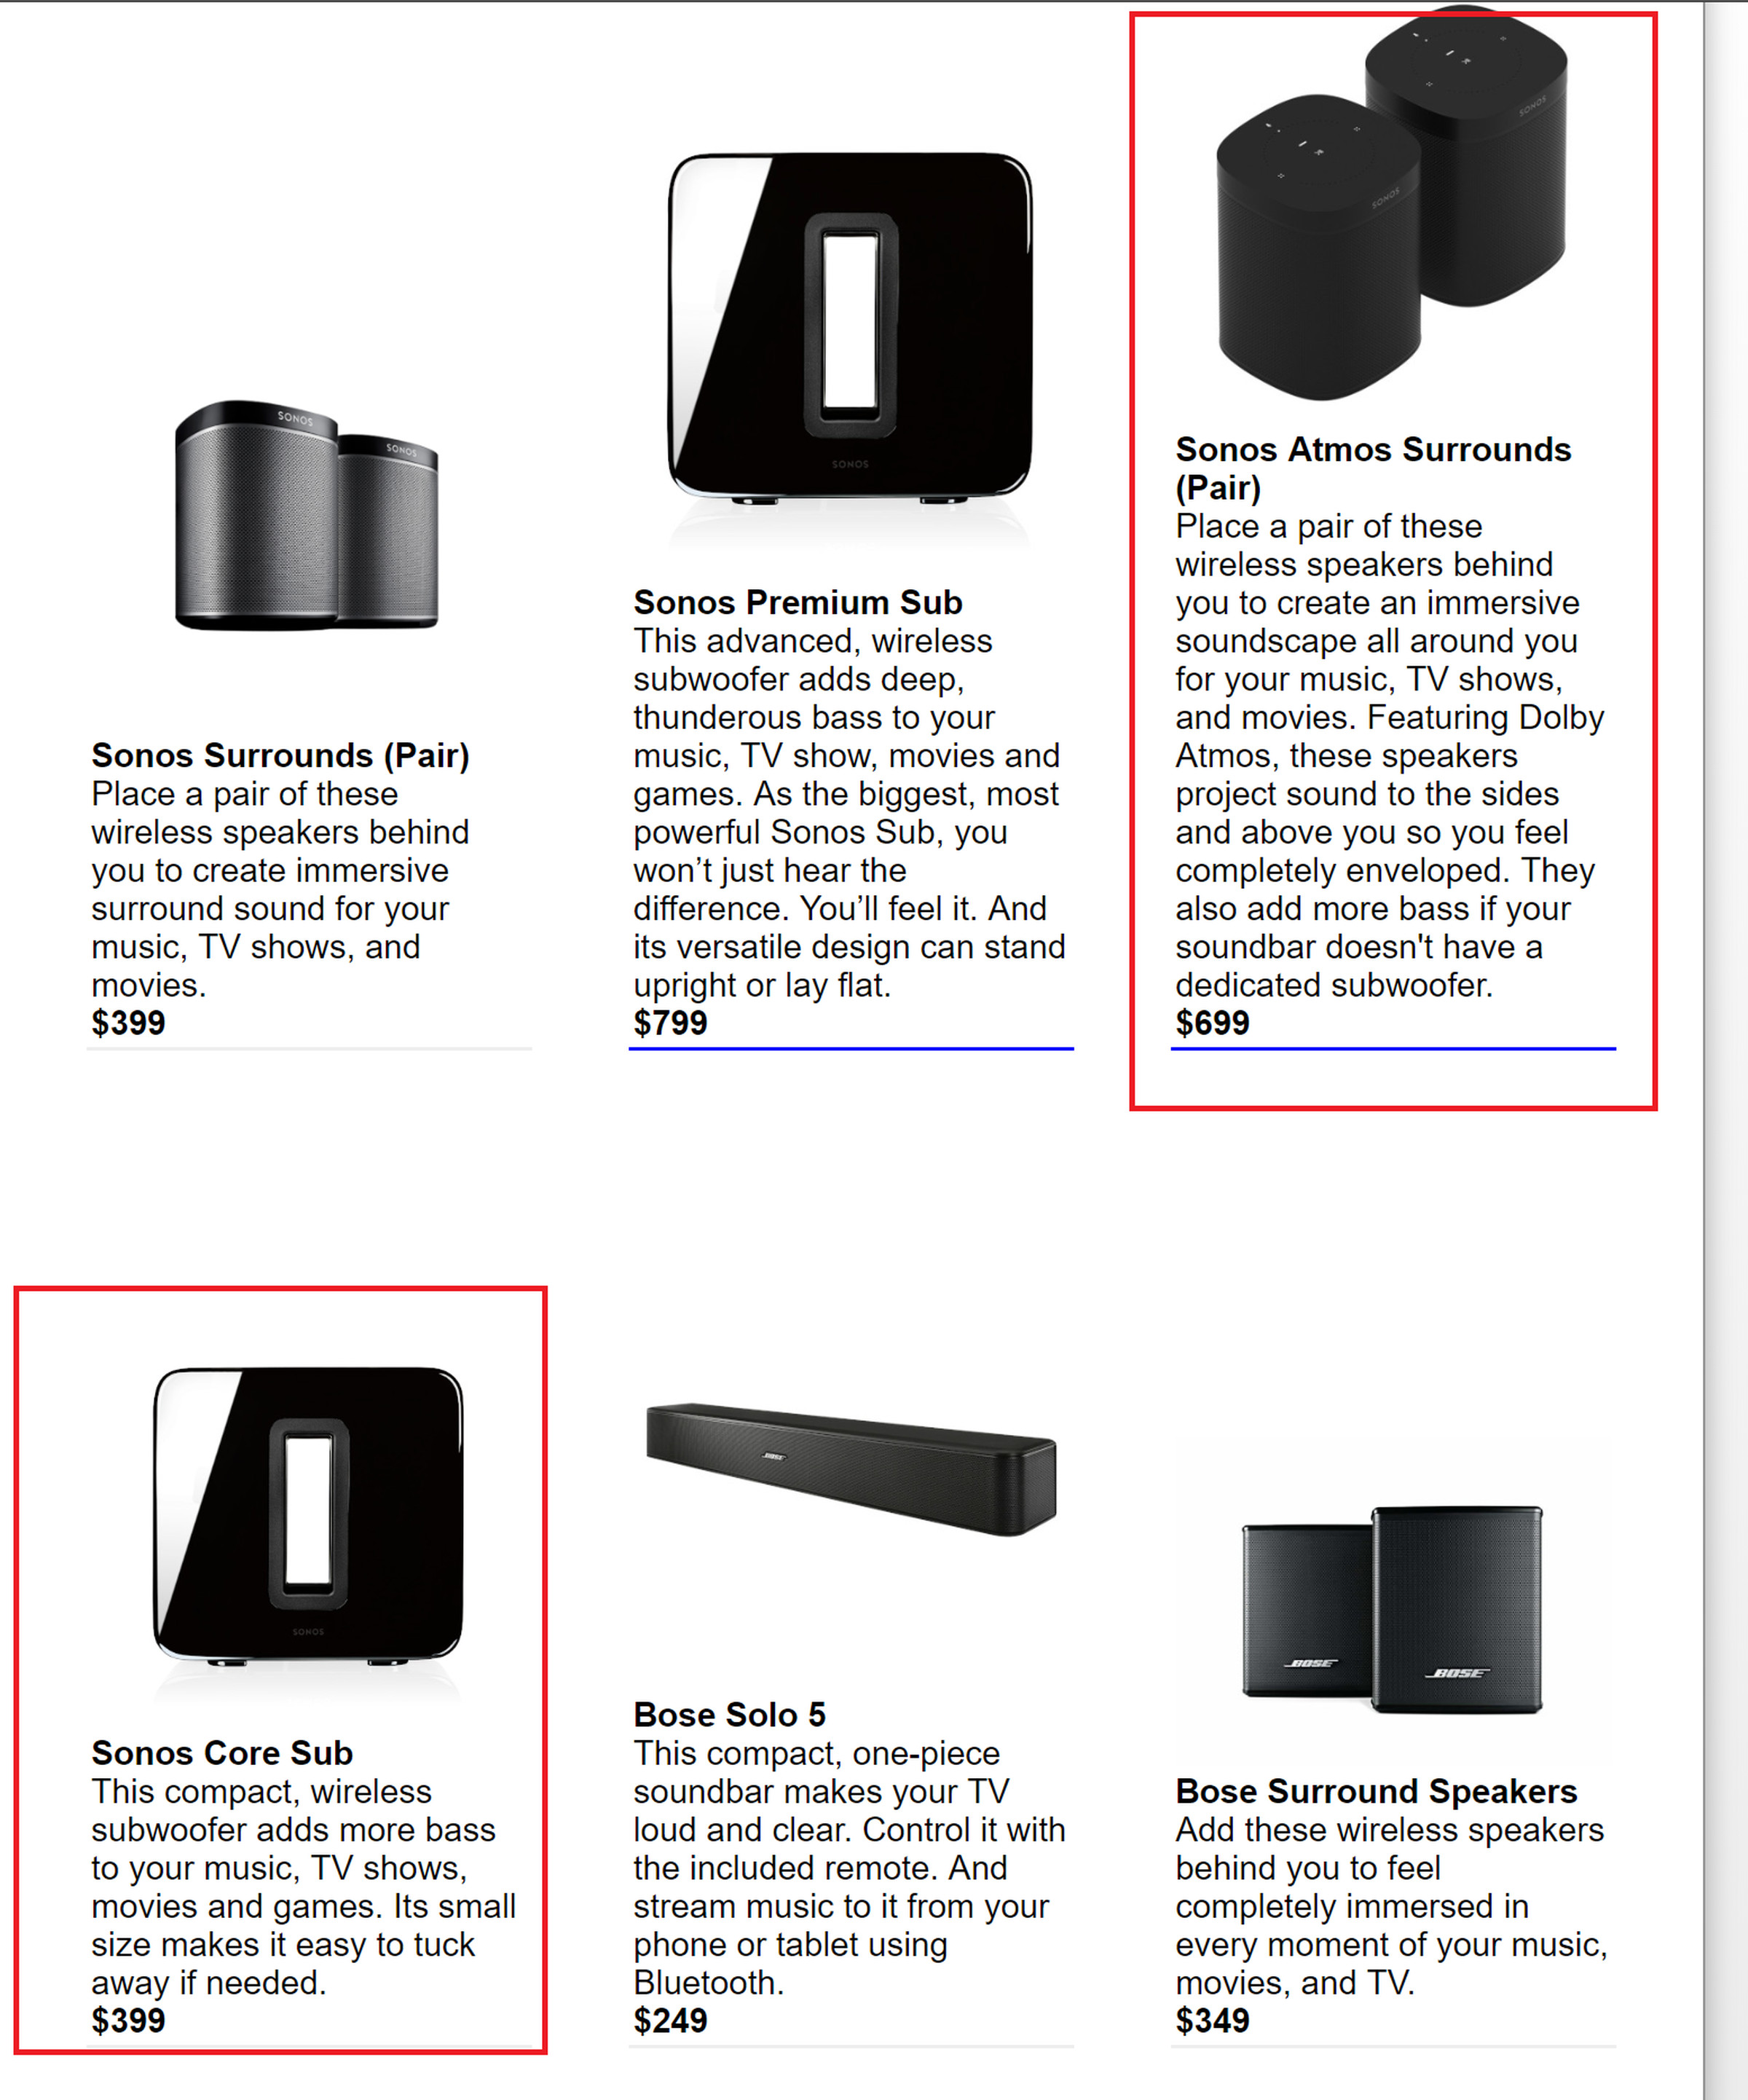 The survey described a number of non-existent Sonos products with potential pricing. Pictures of current models were used as illustrations.